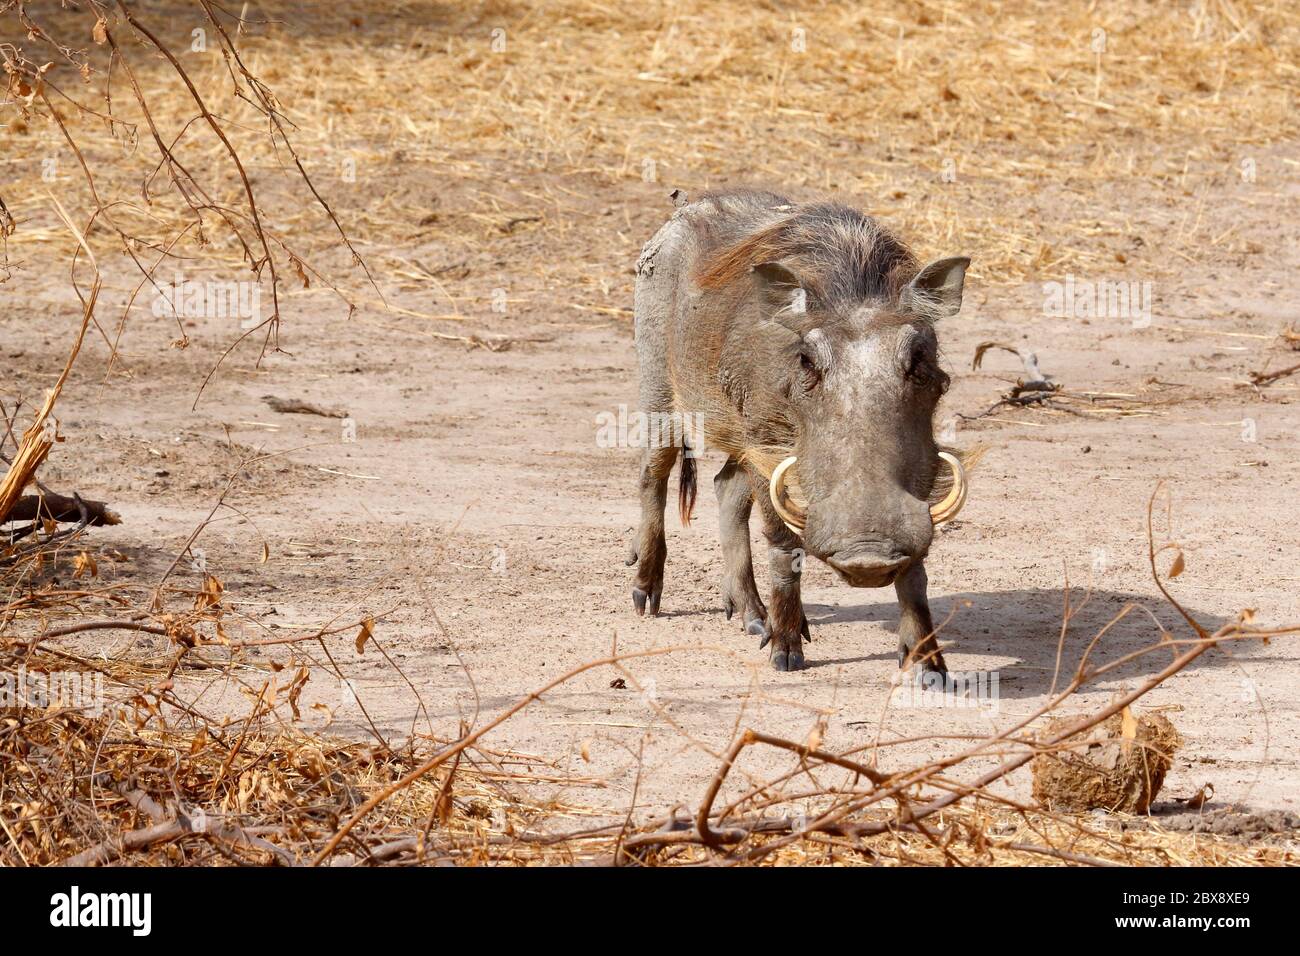 Common Warthog wandering out in the early morning Stock Photo